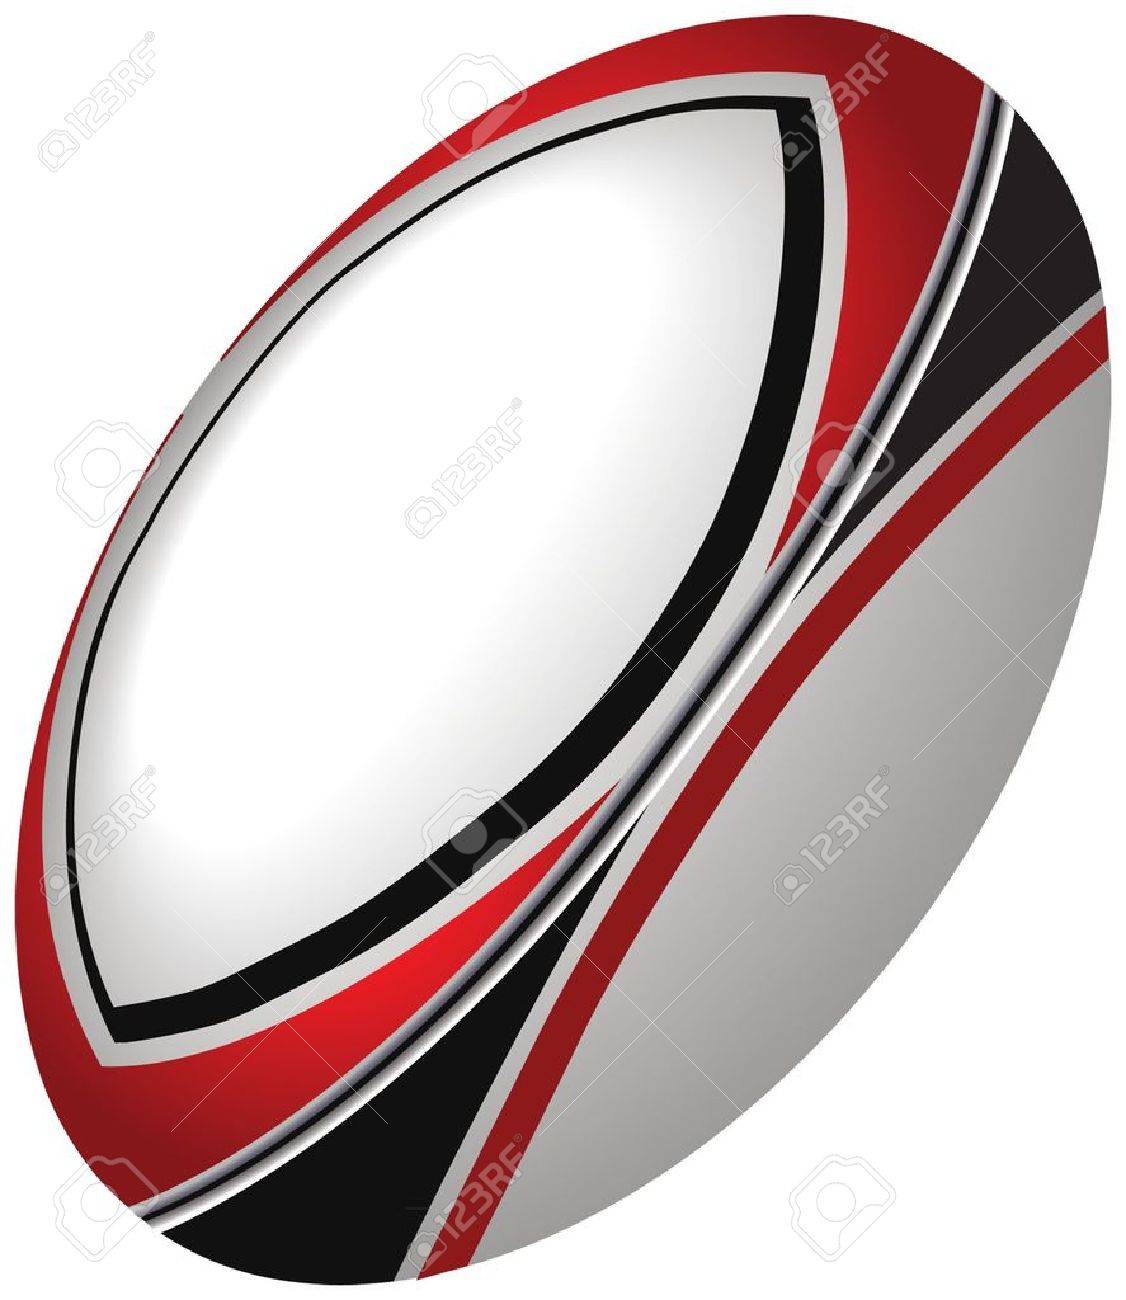 rugby ball clipart 7